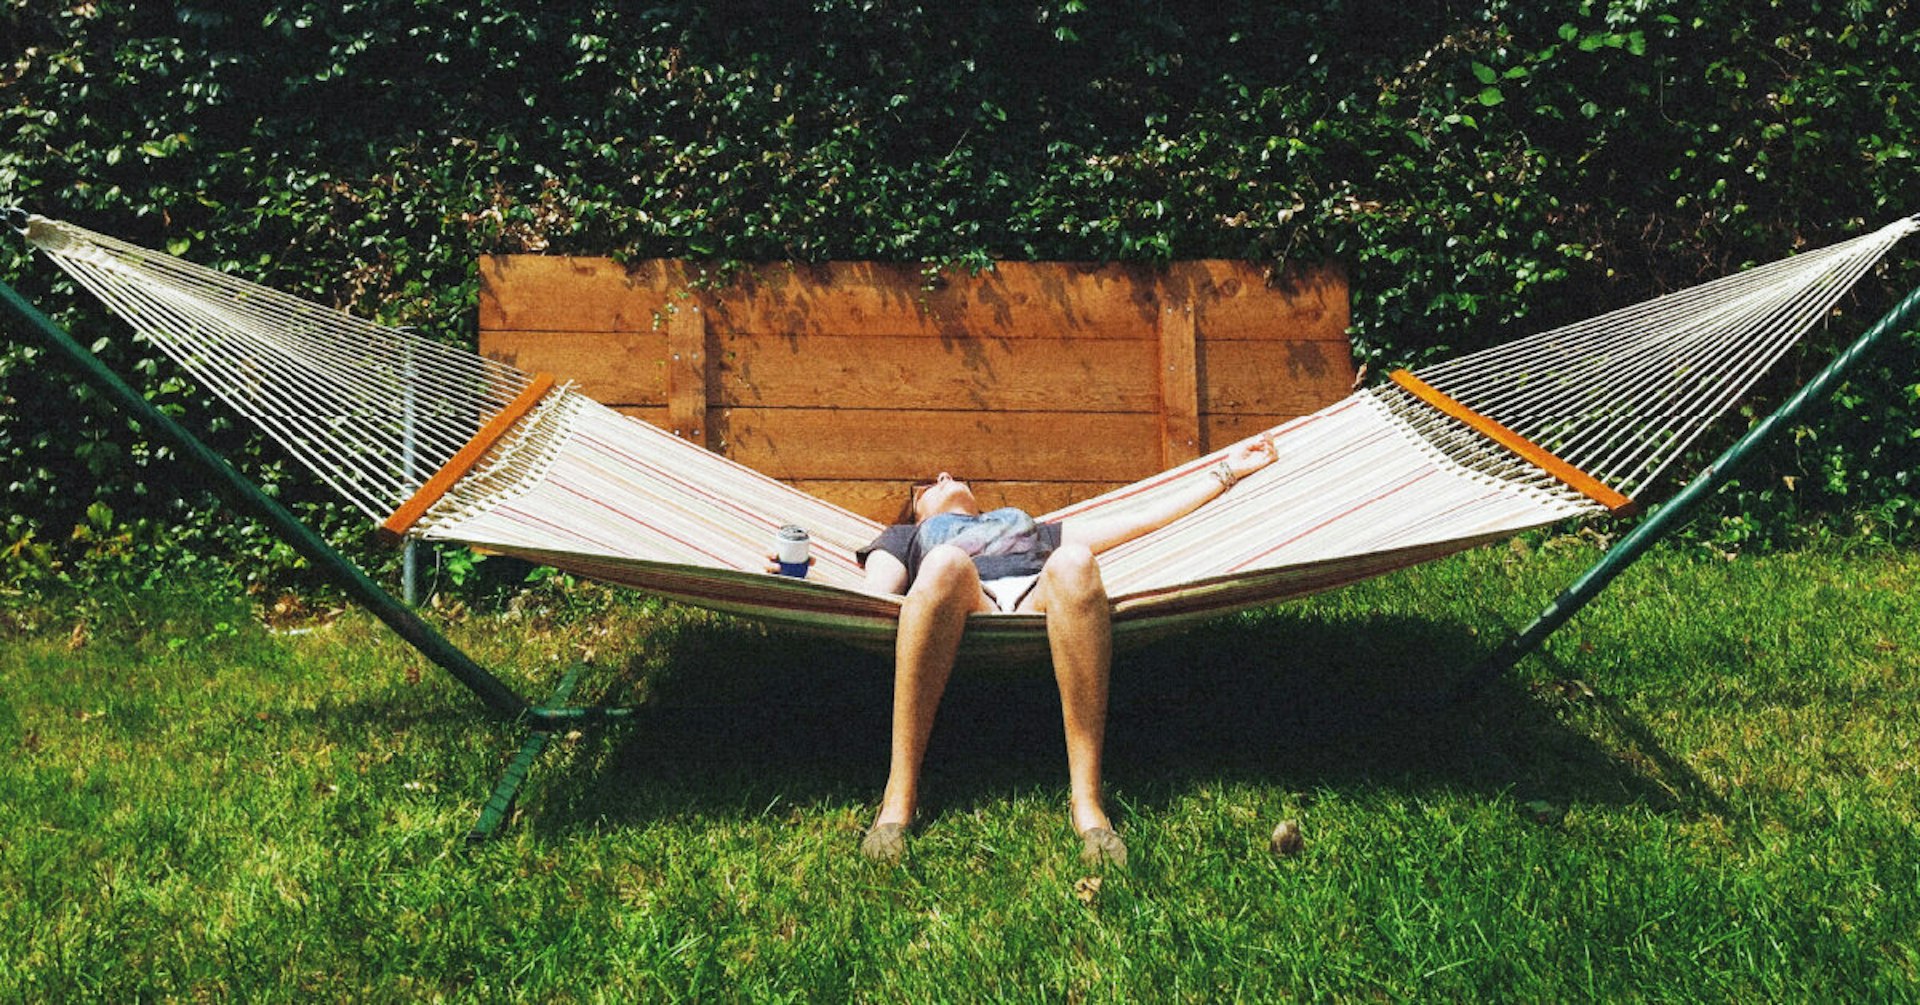 A person lies back on a hammock.